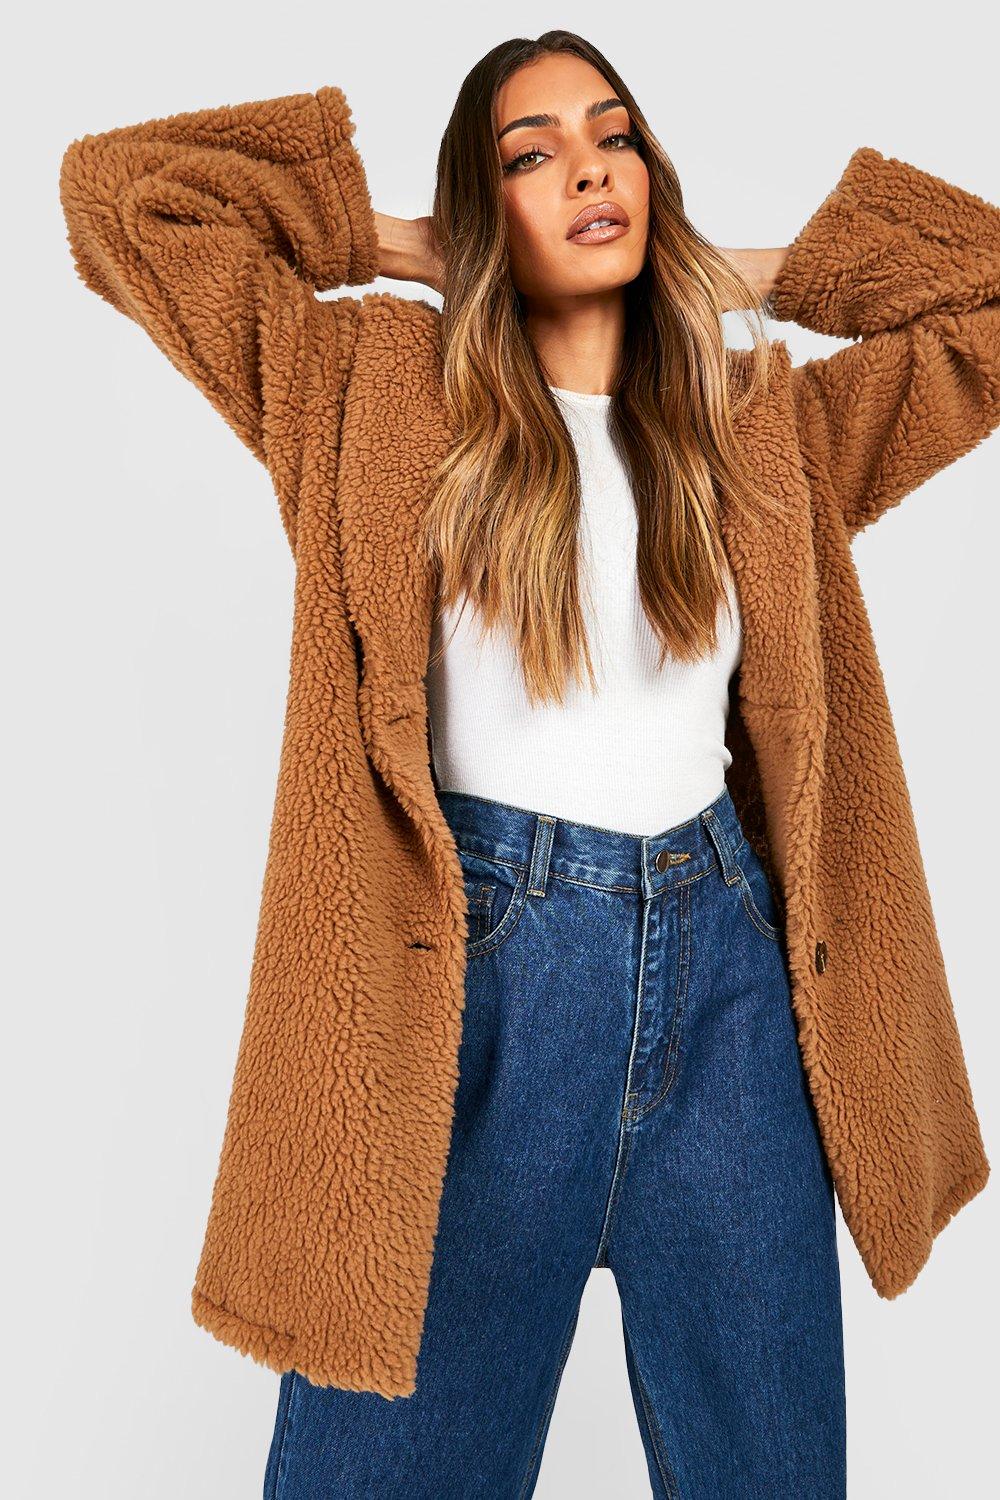 Lucky Brand Faux Fur Women’s OverSized Teddy Shacket Button Camel New w/Tags